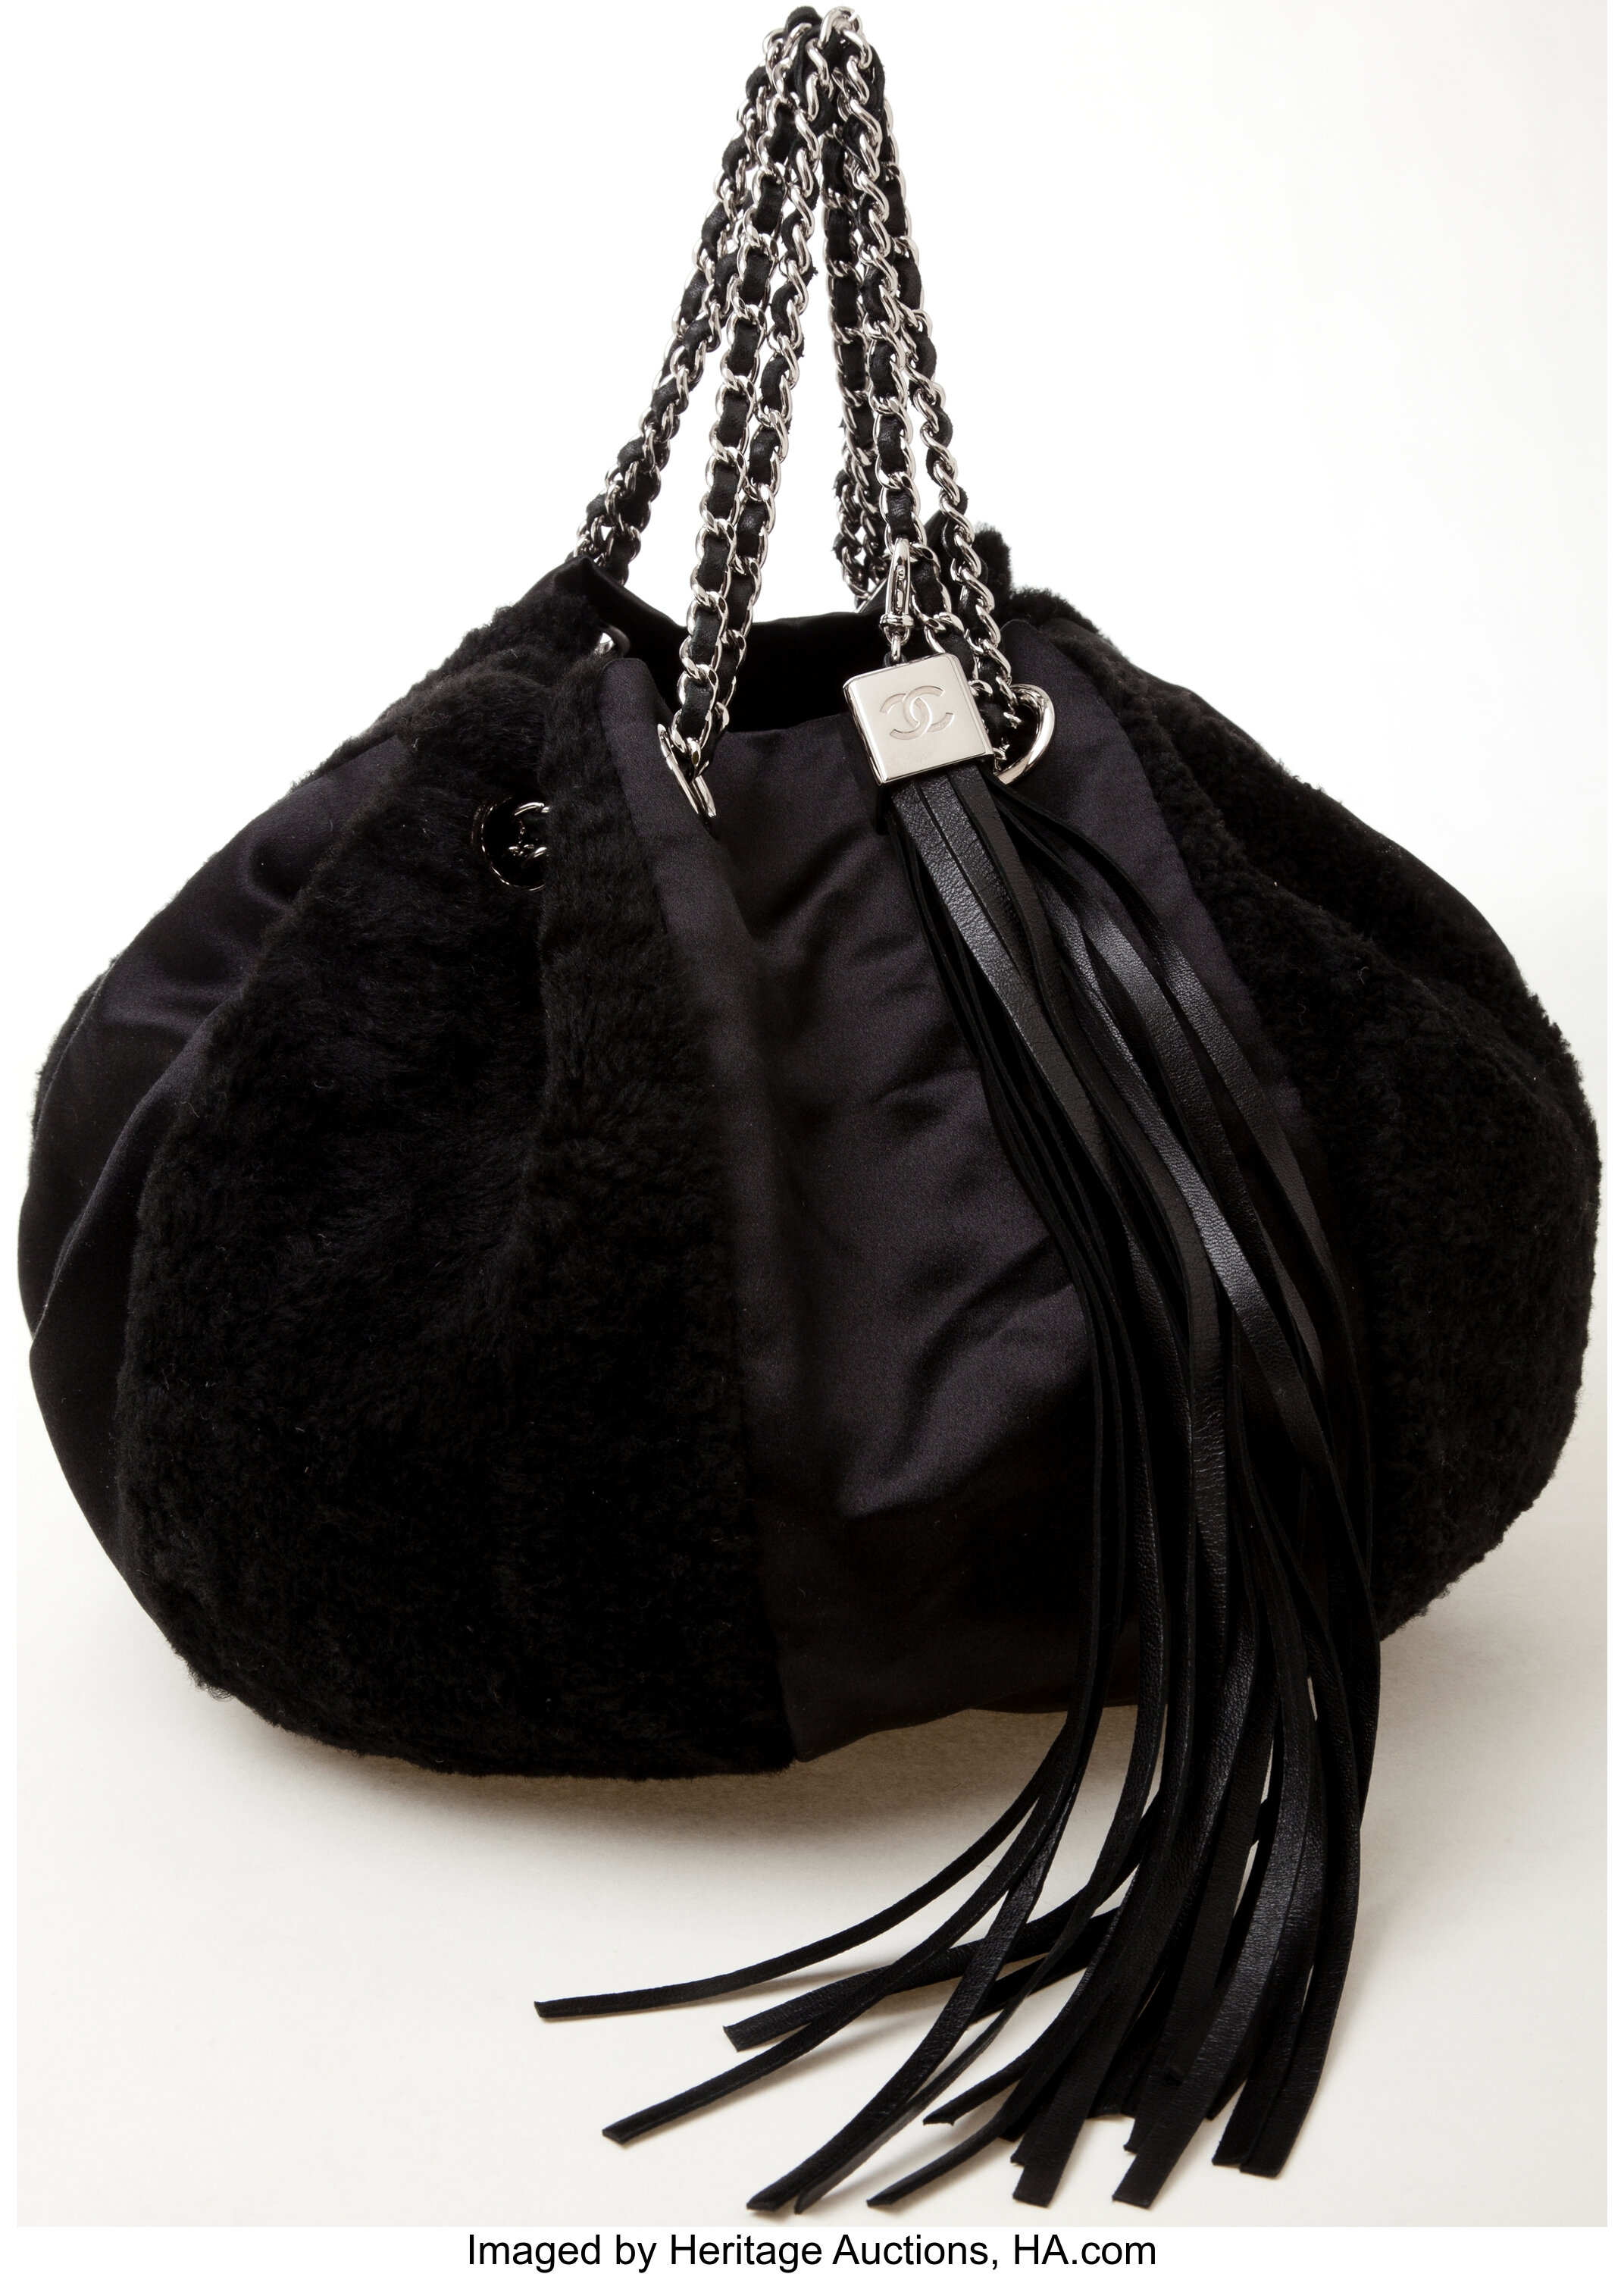 Chanel Black Suede Shearling hobo bag with silver hardware Leather